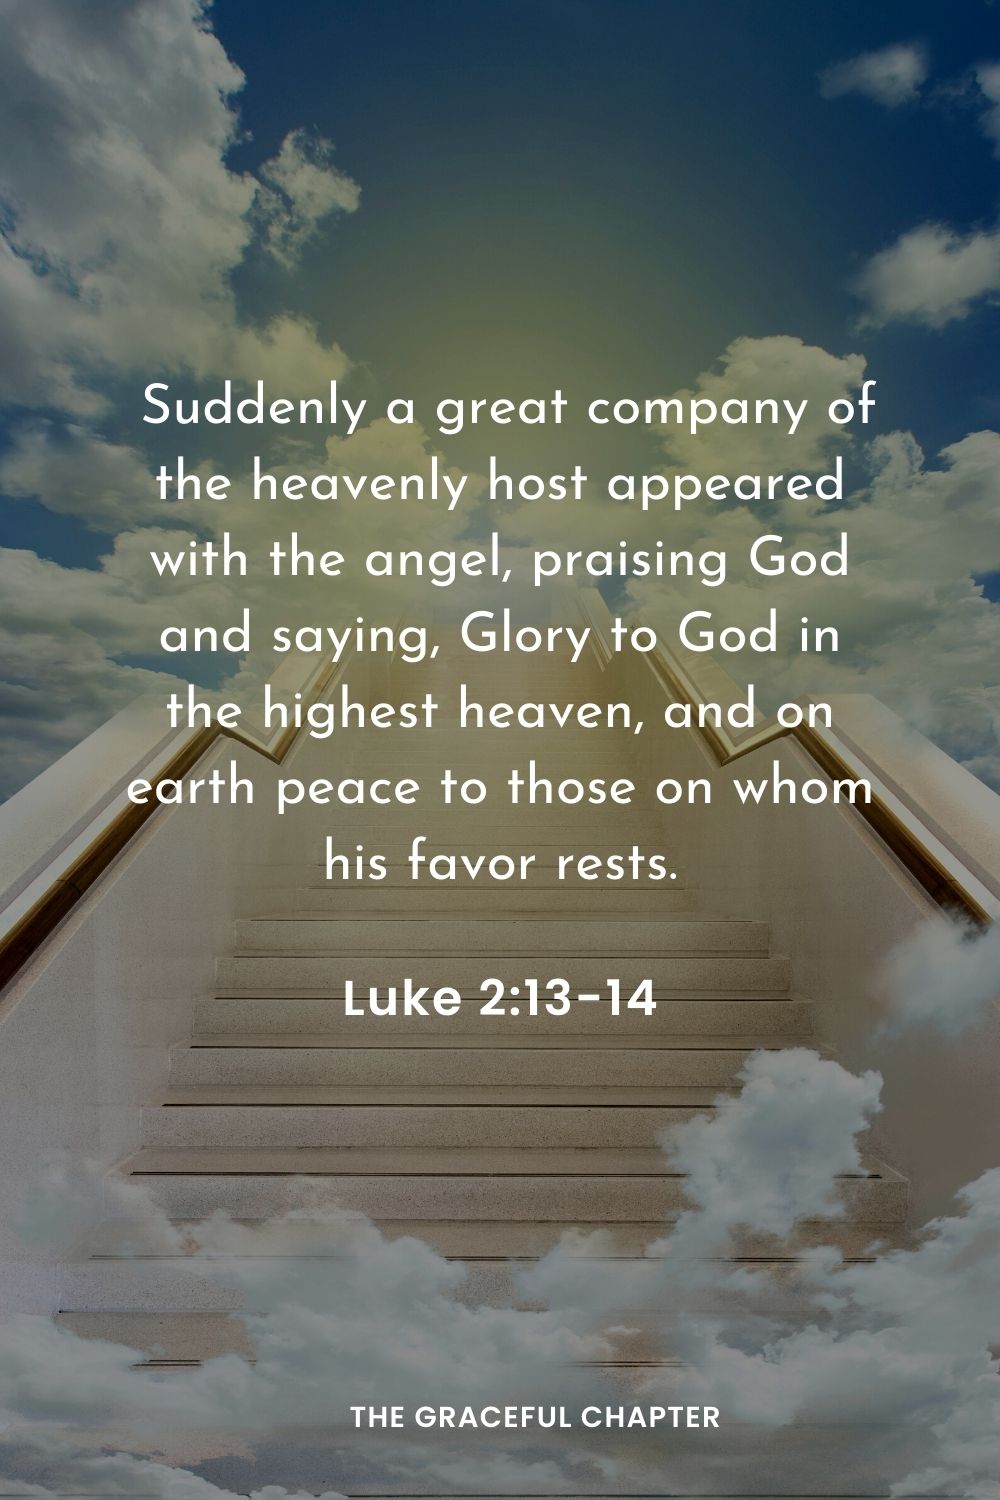  Suddenly a great company of the heavenly host appeared with the angel, praising God and saying, Glory to God in the highest heaven, and on earth peace to those on whom his favor rests.